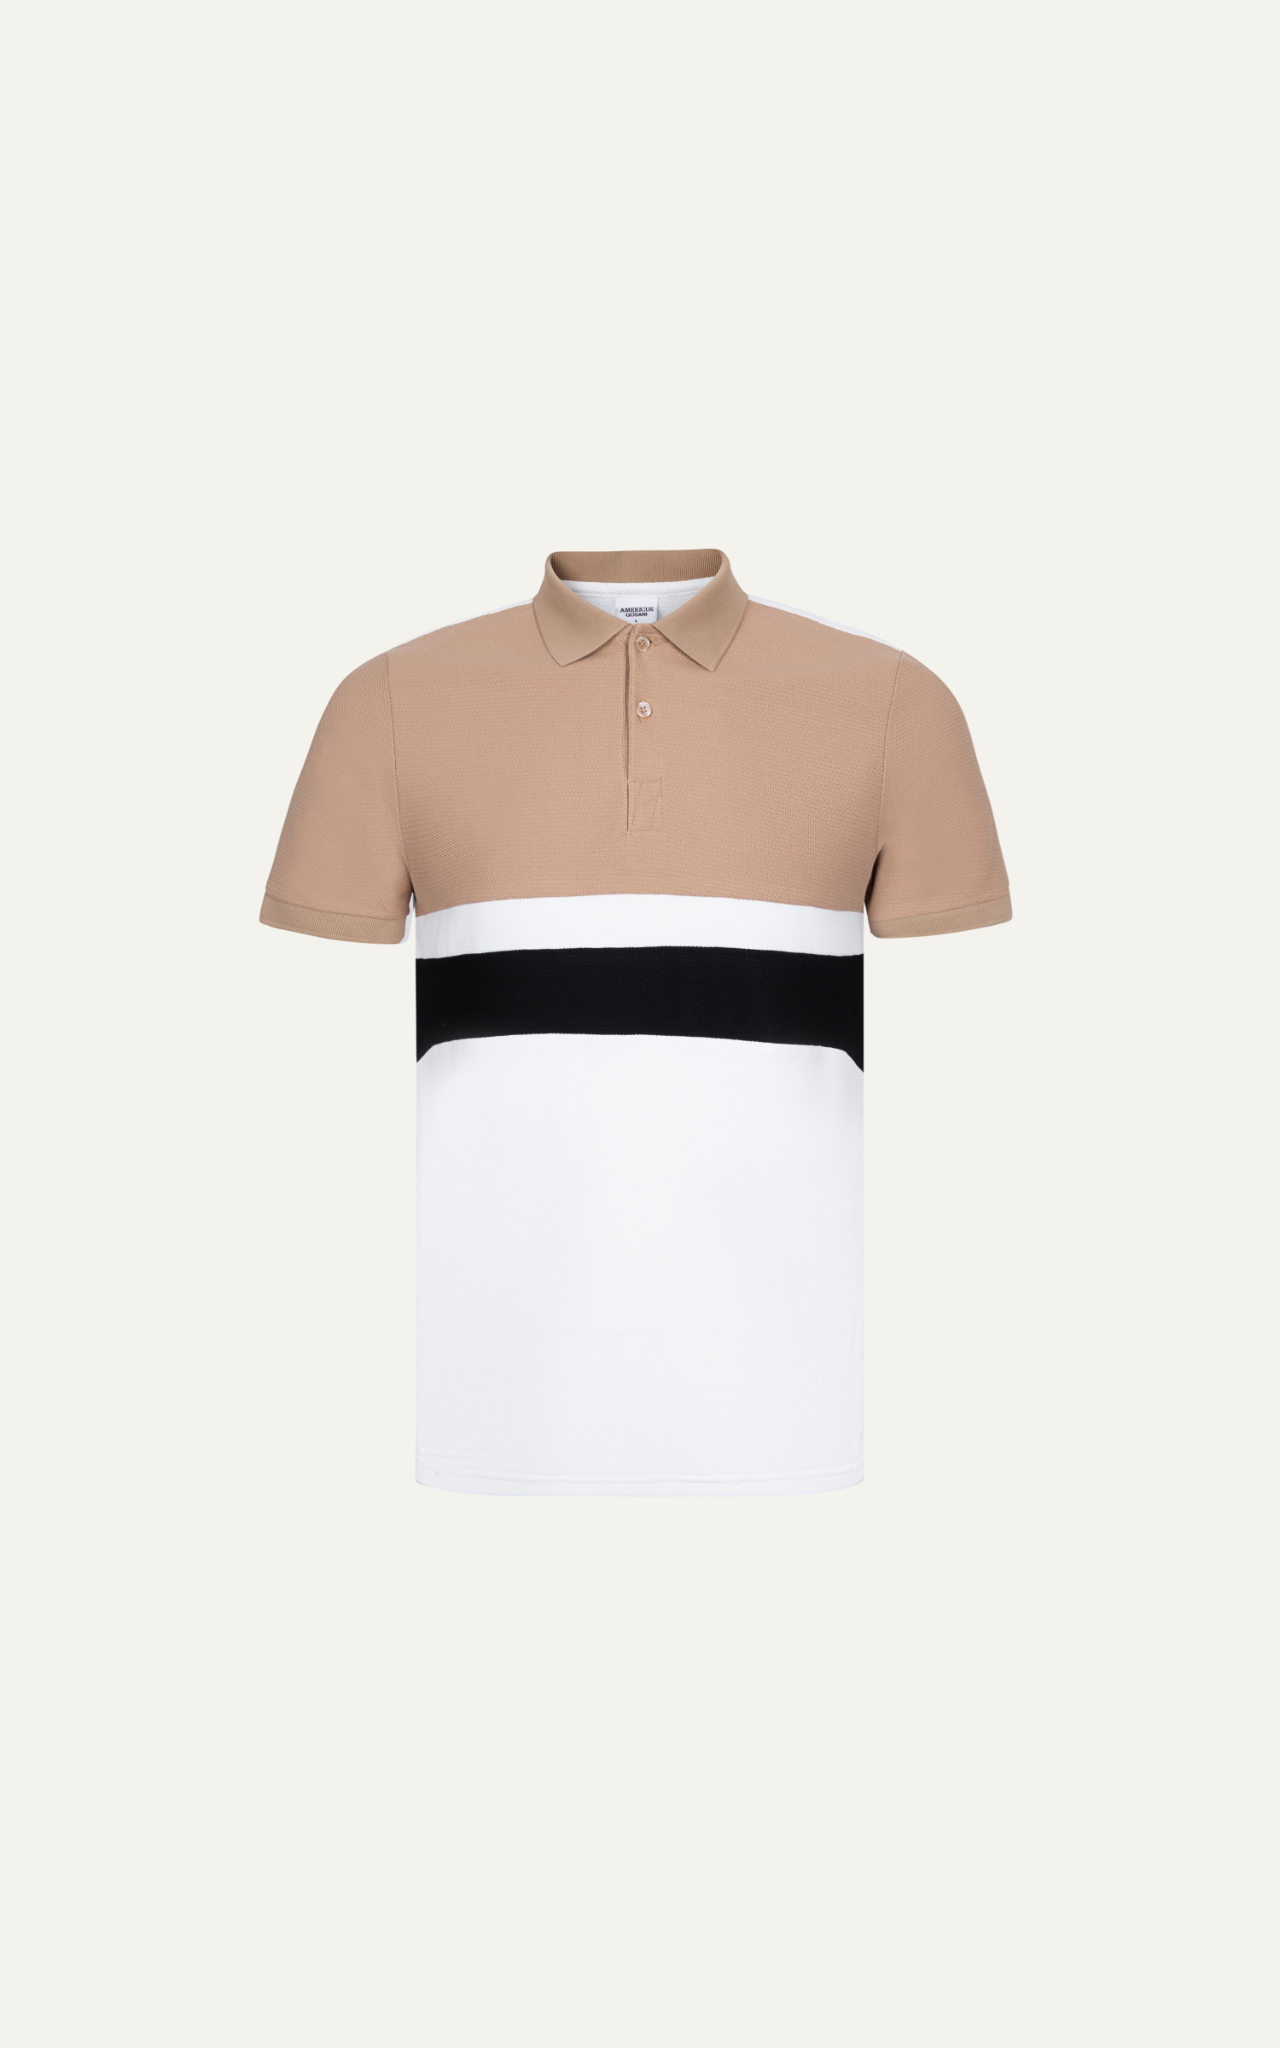 T66 FACTORY SLIMFIT POLO WITH MIX COLOR - BROWN